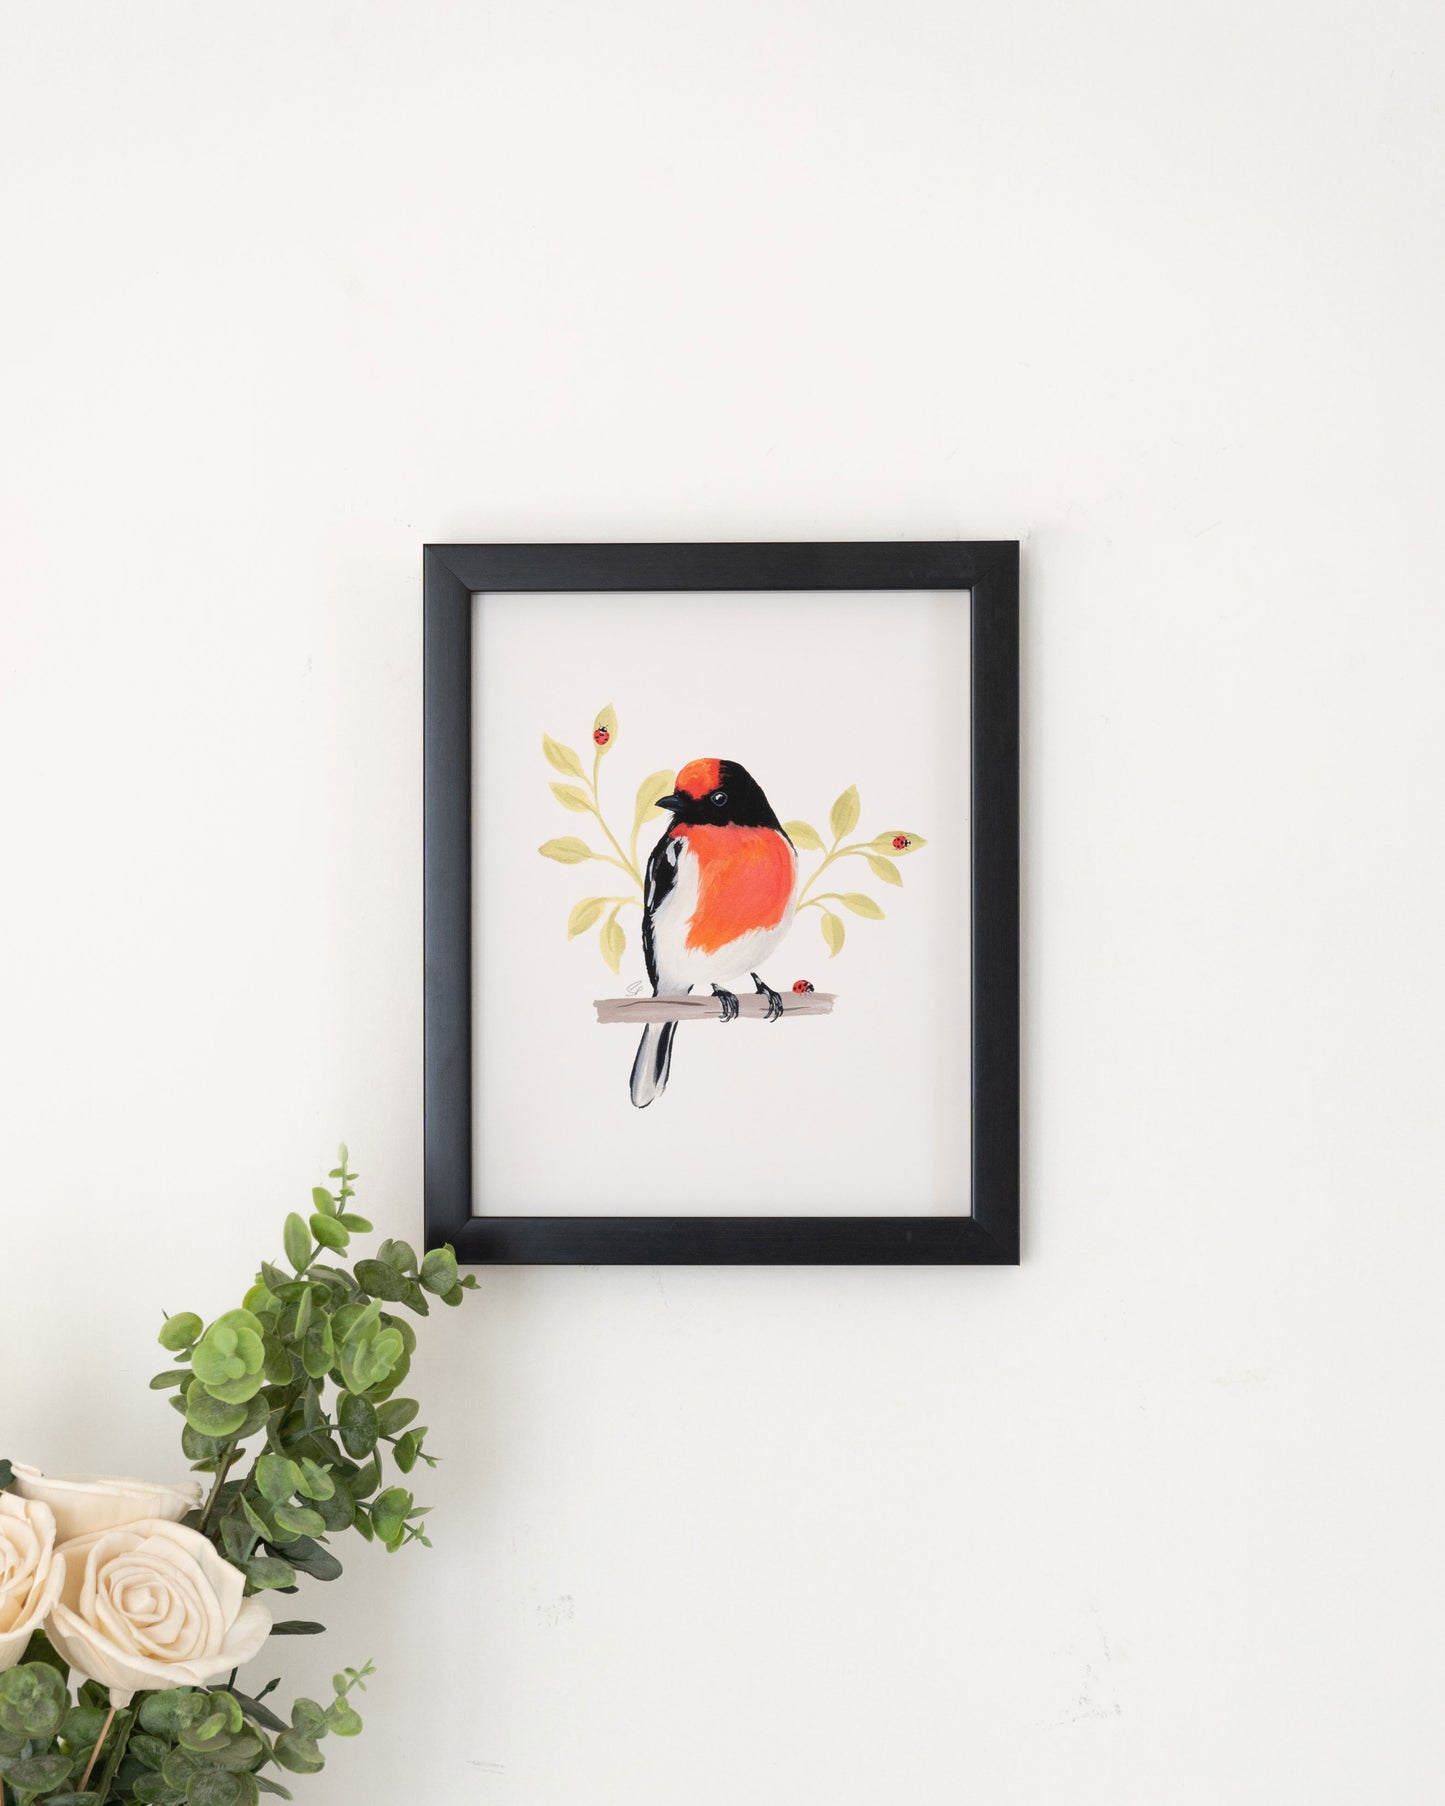 Red Capped Robin  : Archival Print